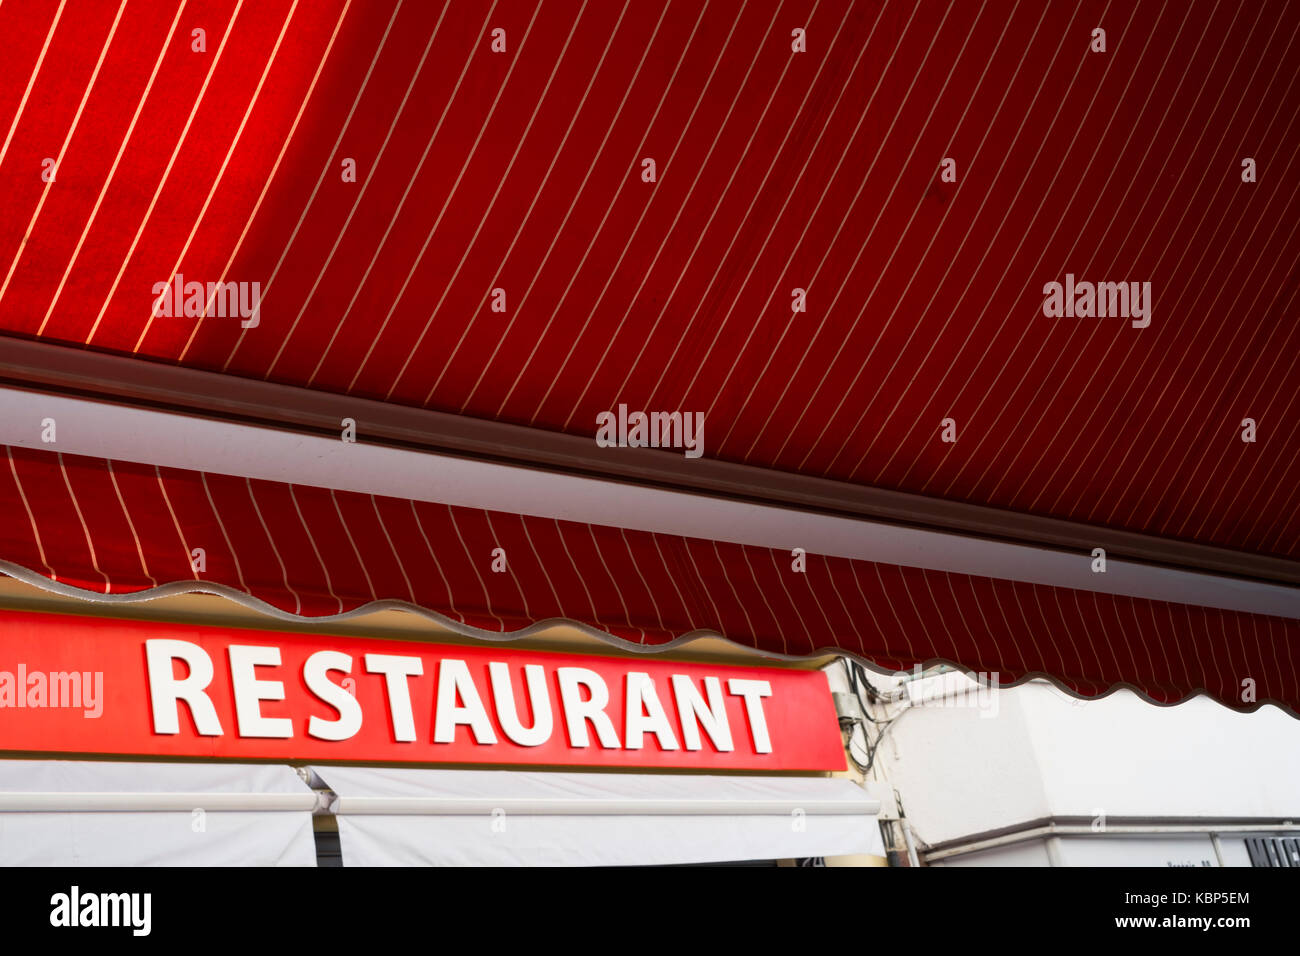 A red canopy opposite a red restaurant sign in Lloret de Mar, Spain Stock Photo